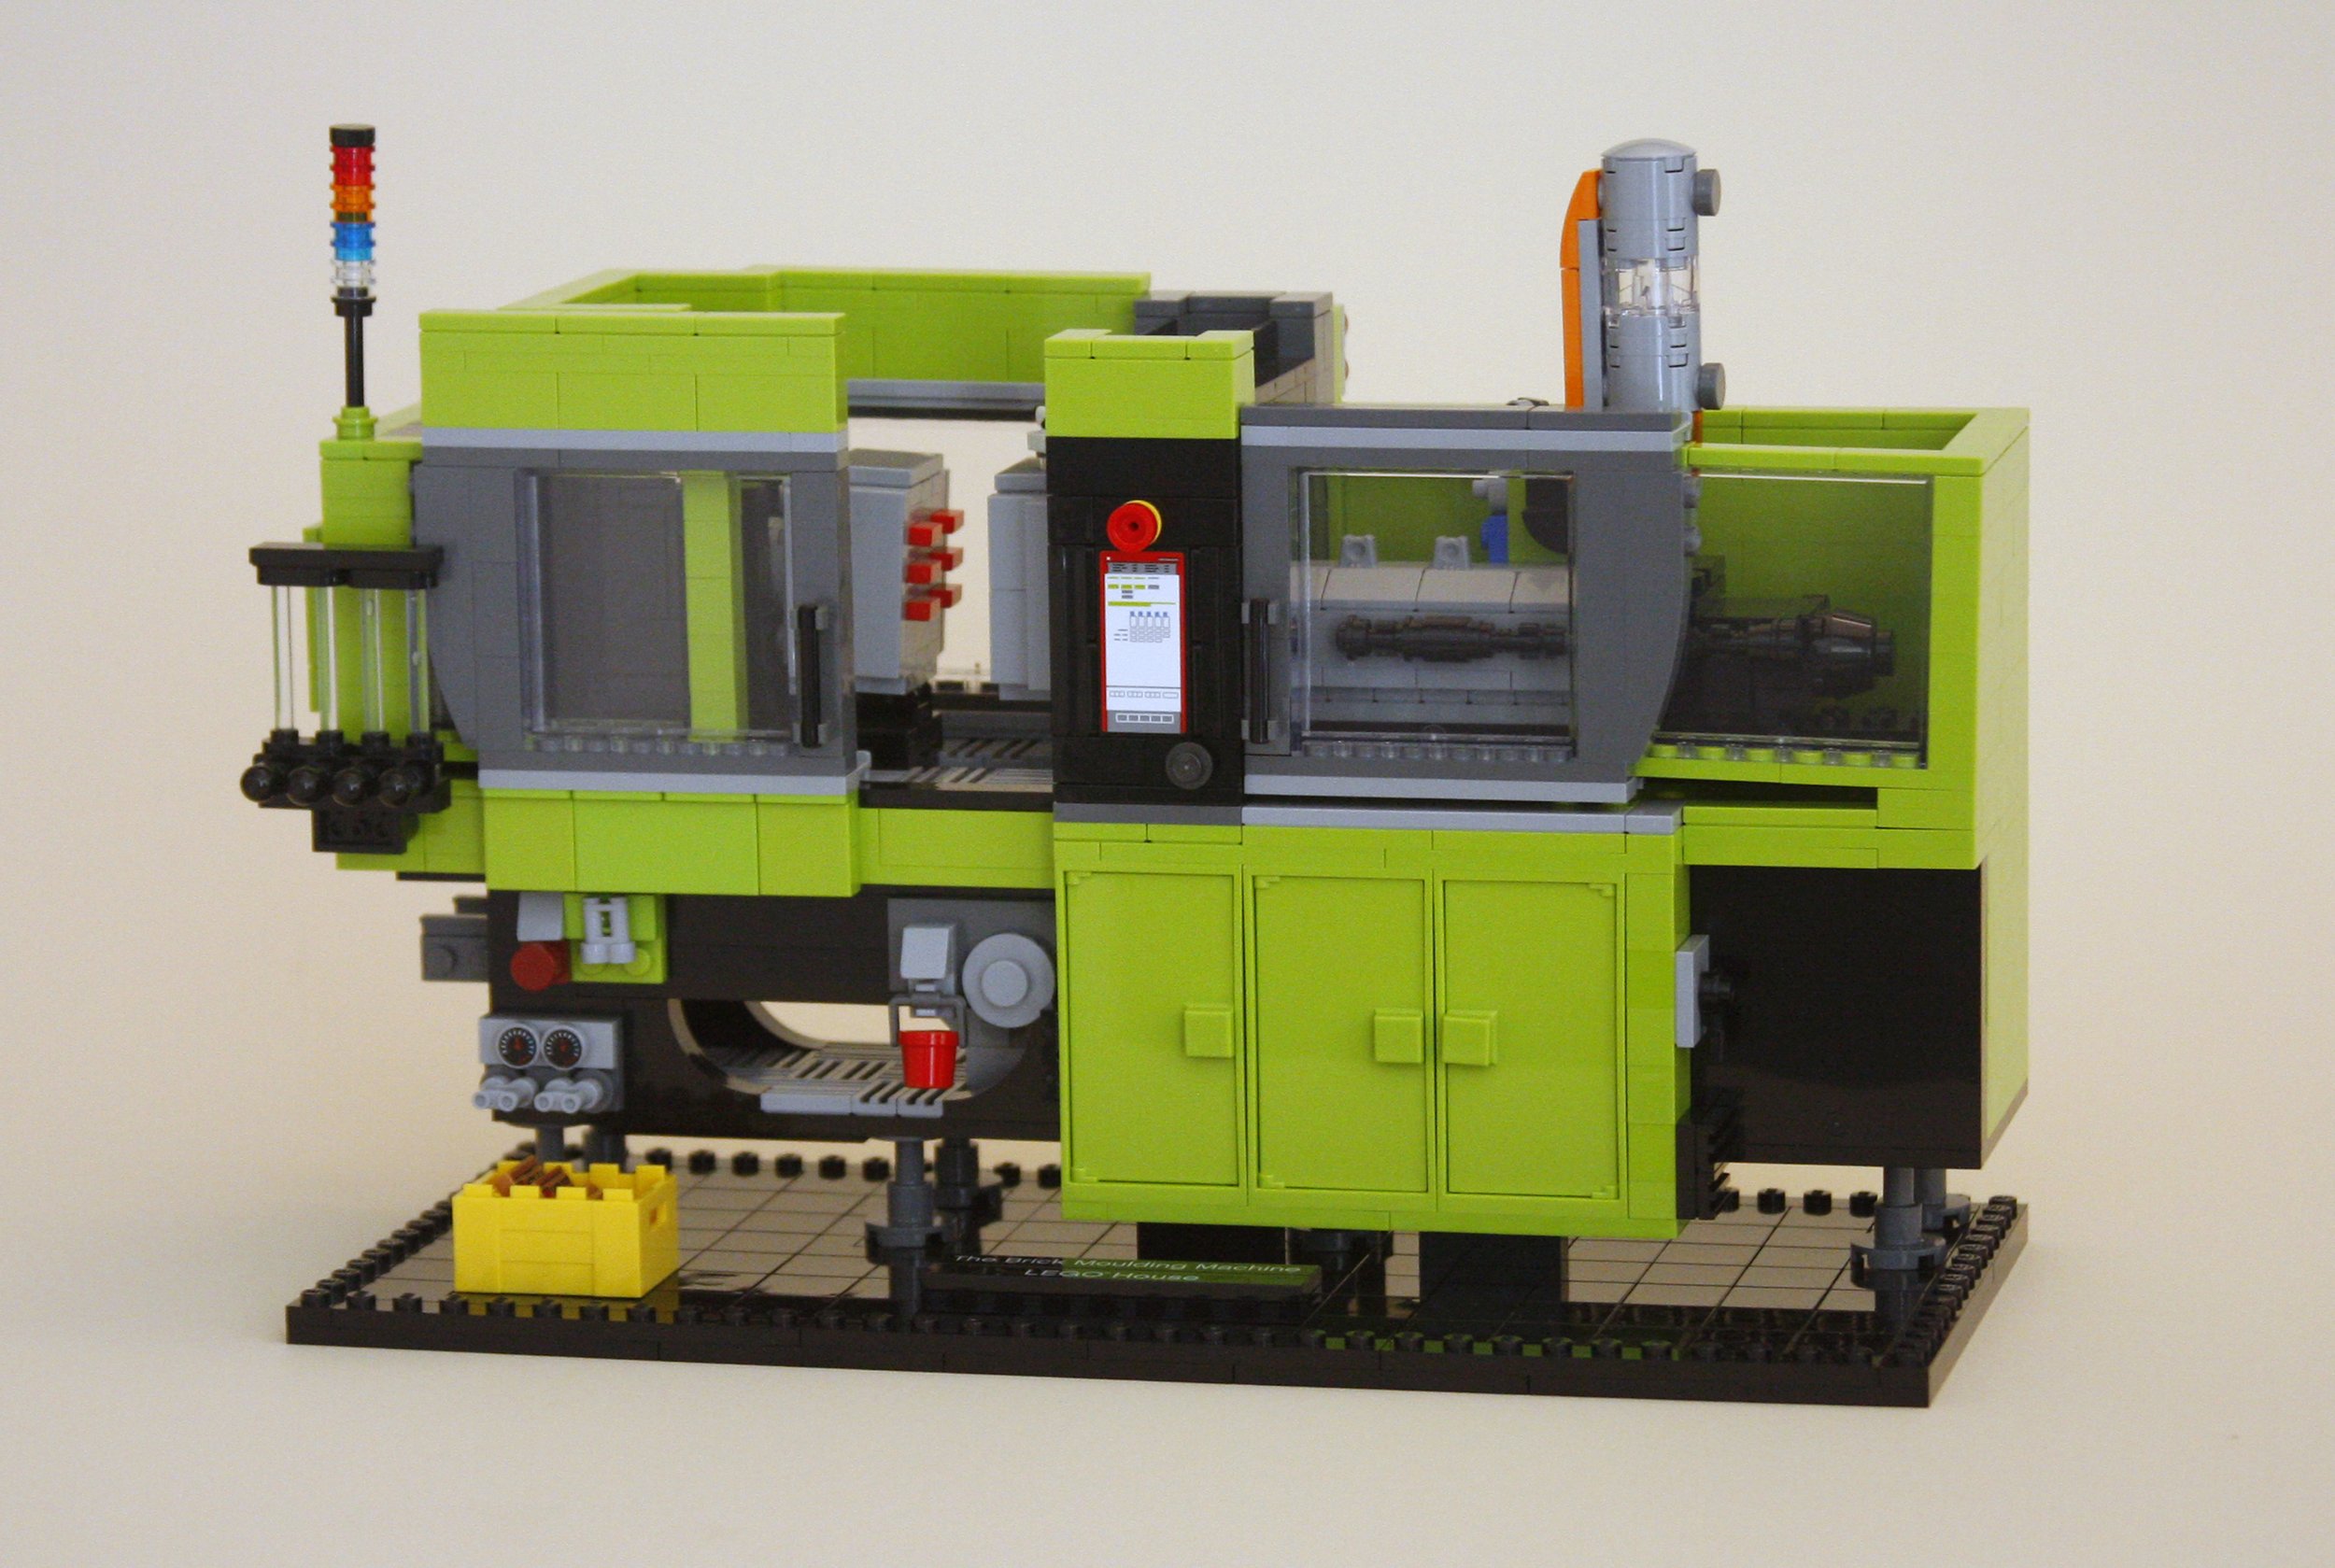 House Sets: Only in Billund BrickNerd - All things and the LEGO fan community